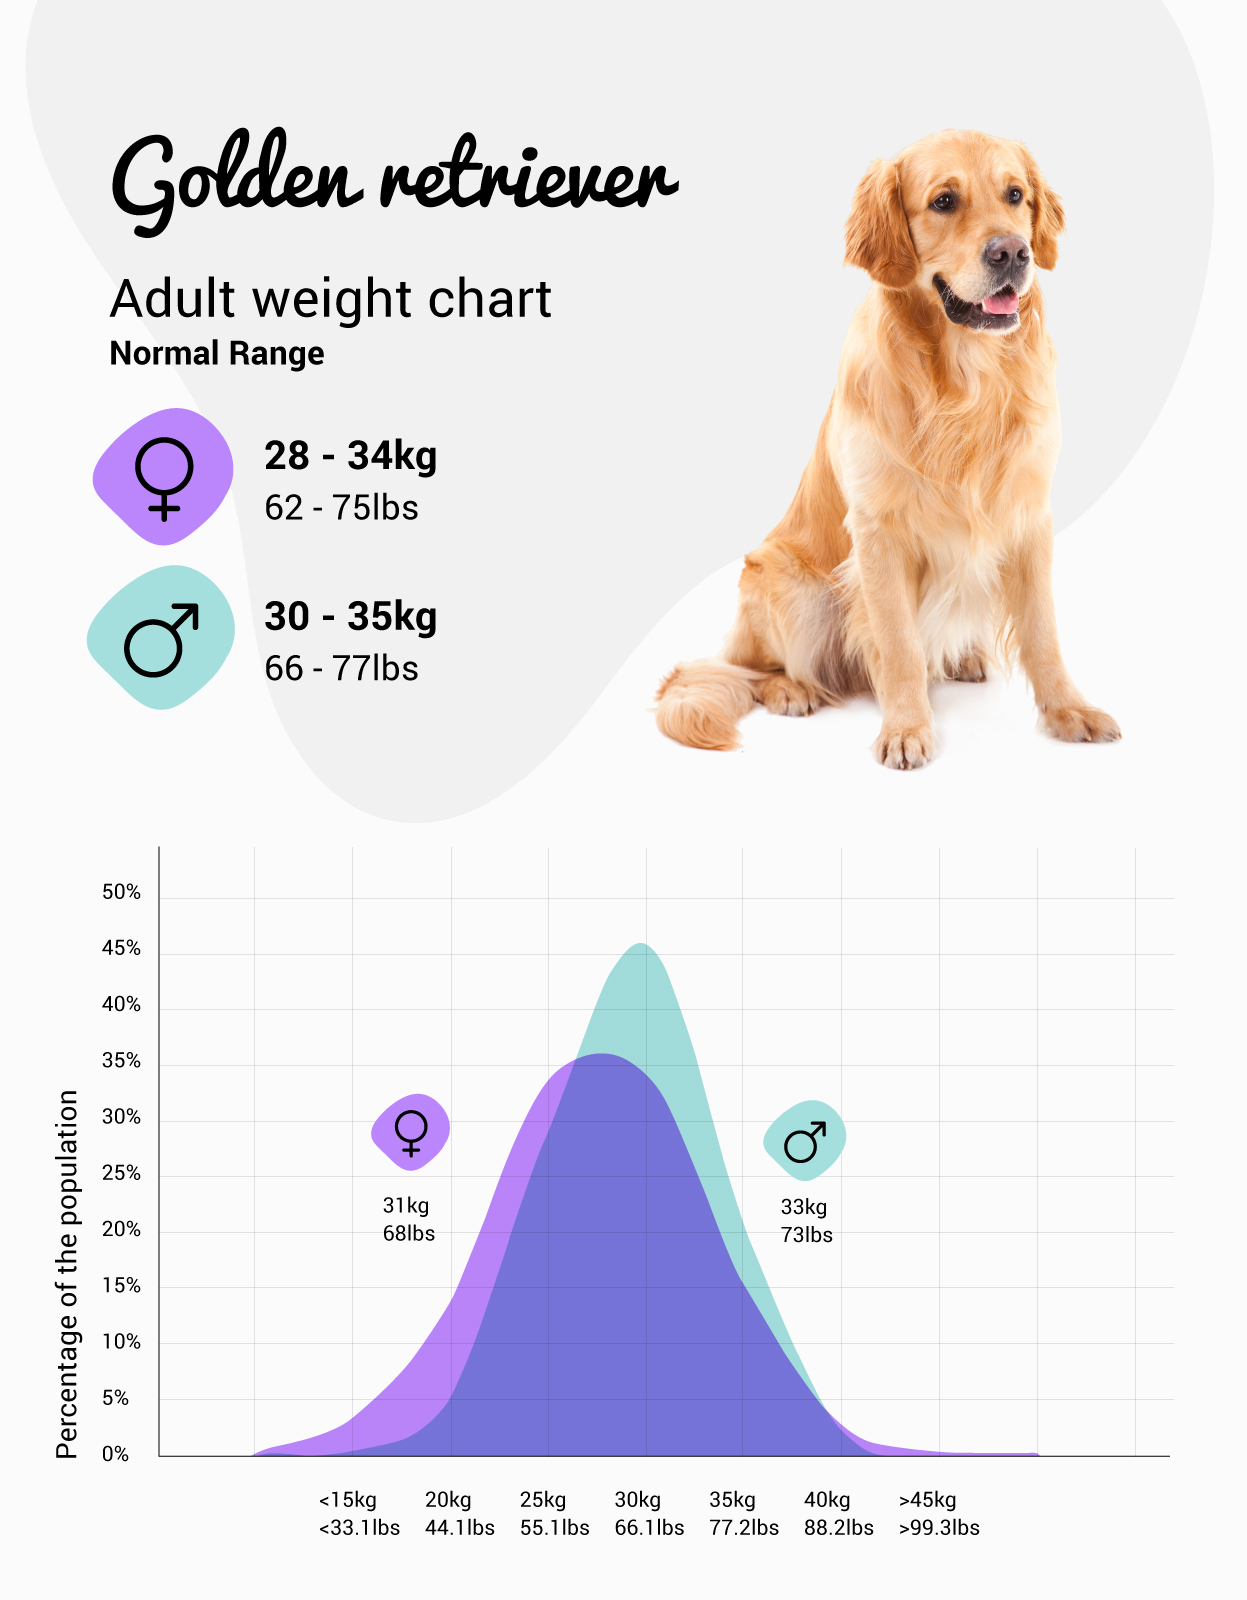 what is the average weight of a golden retriever?